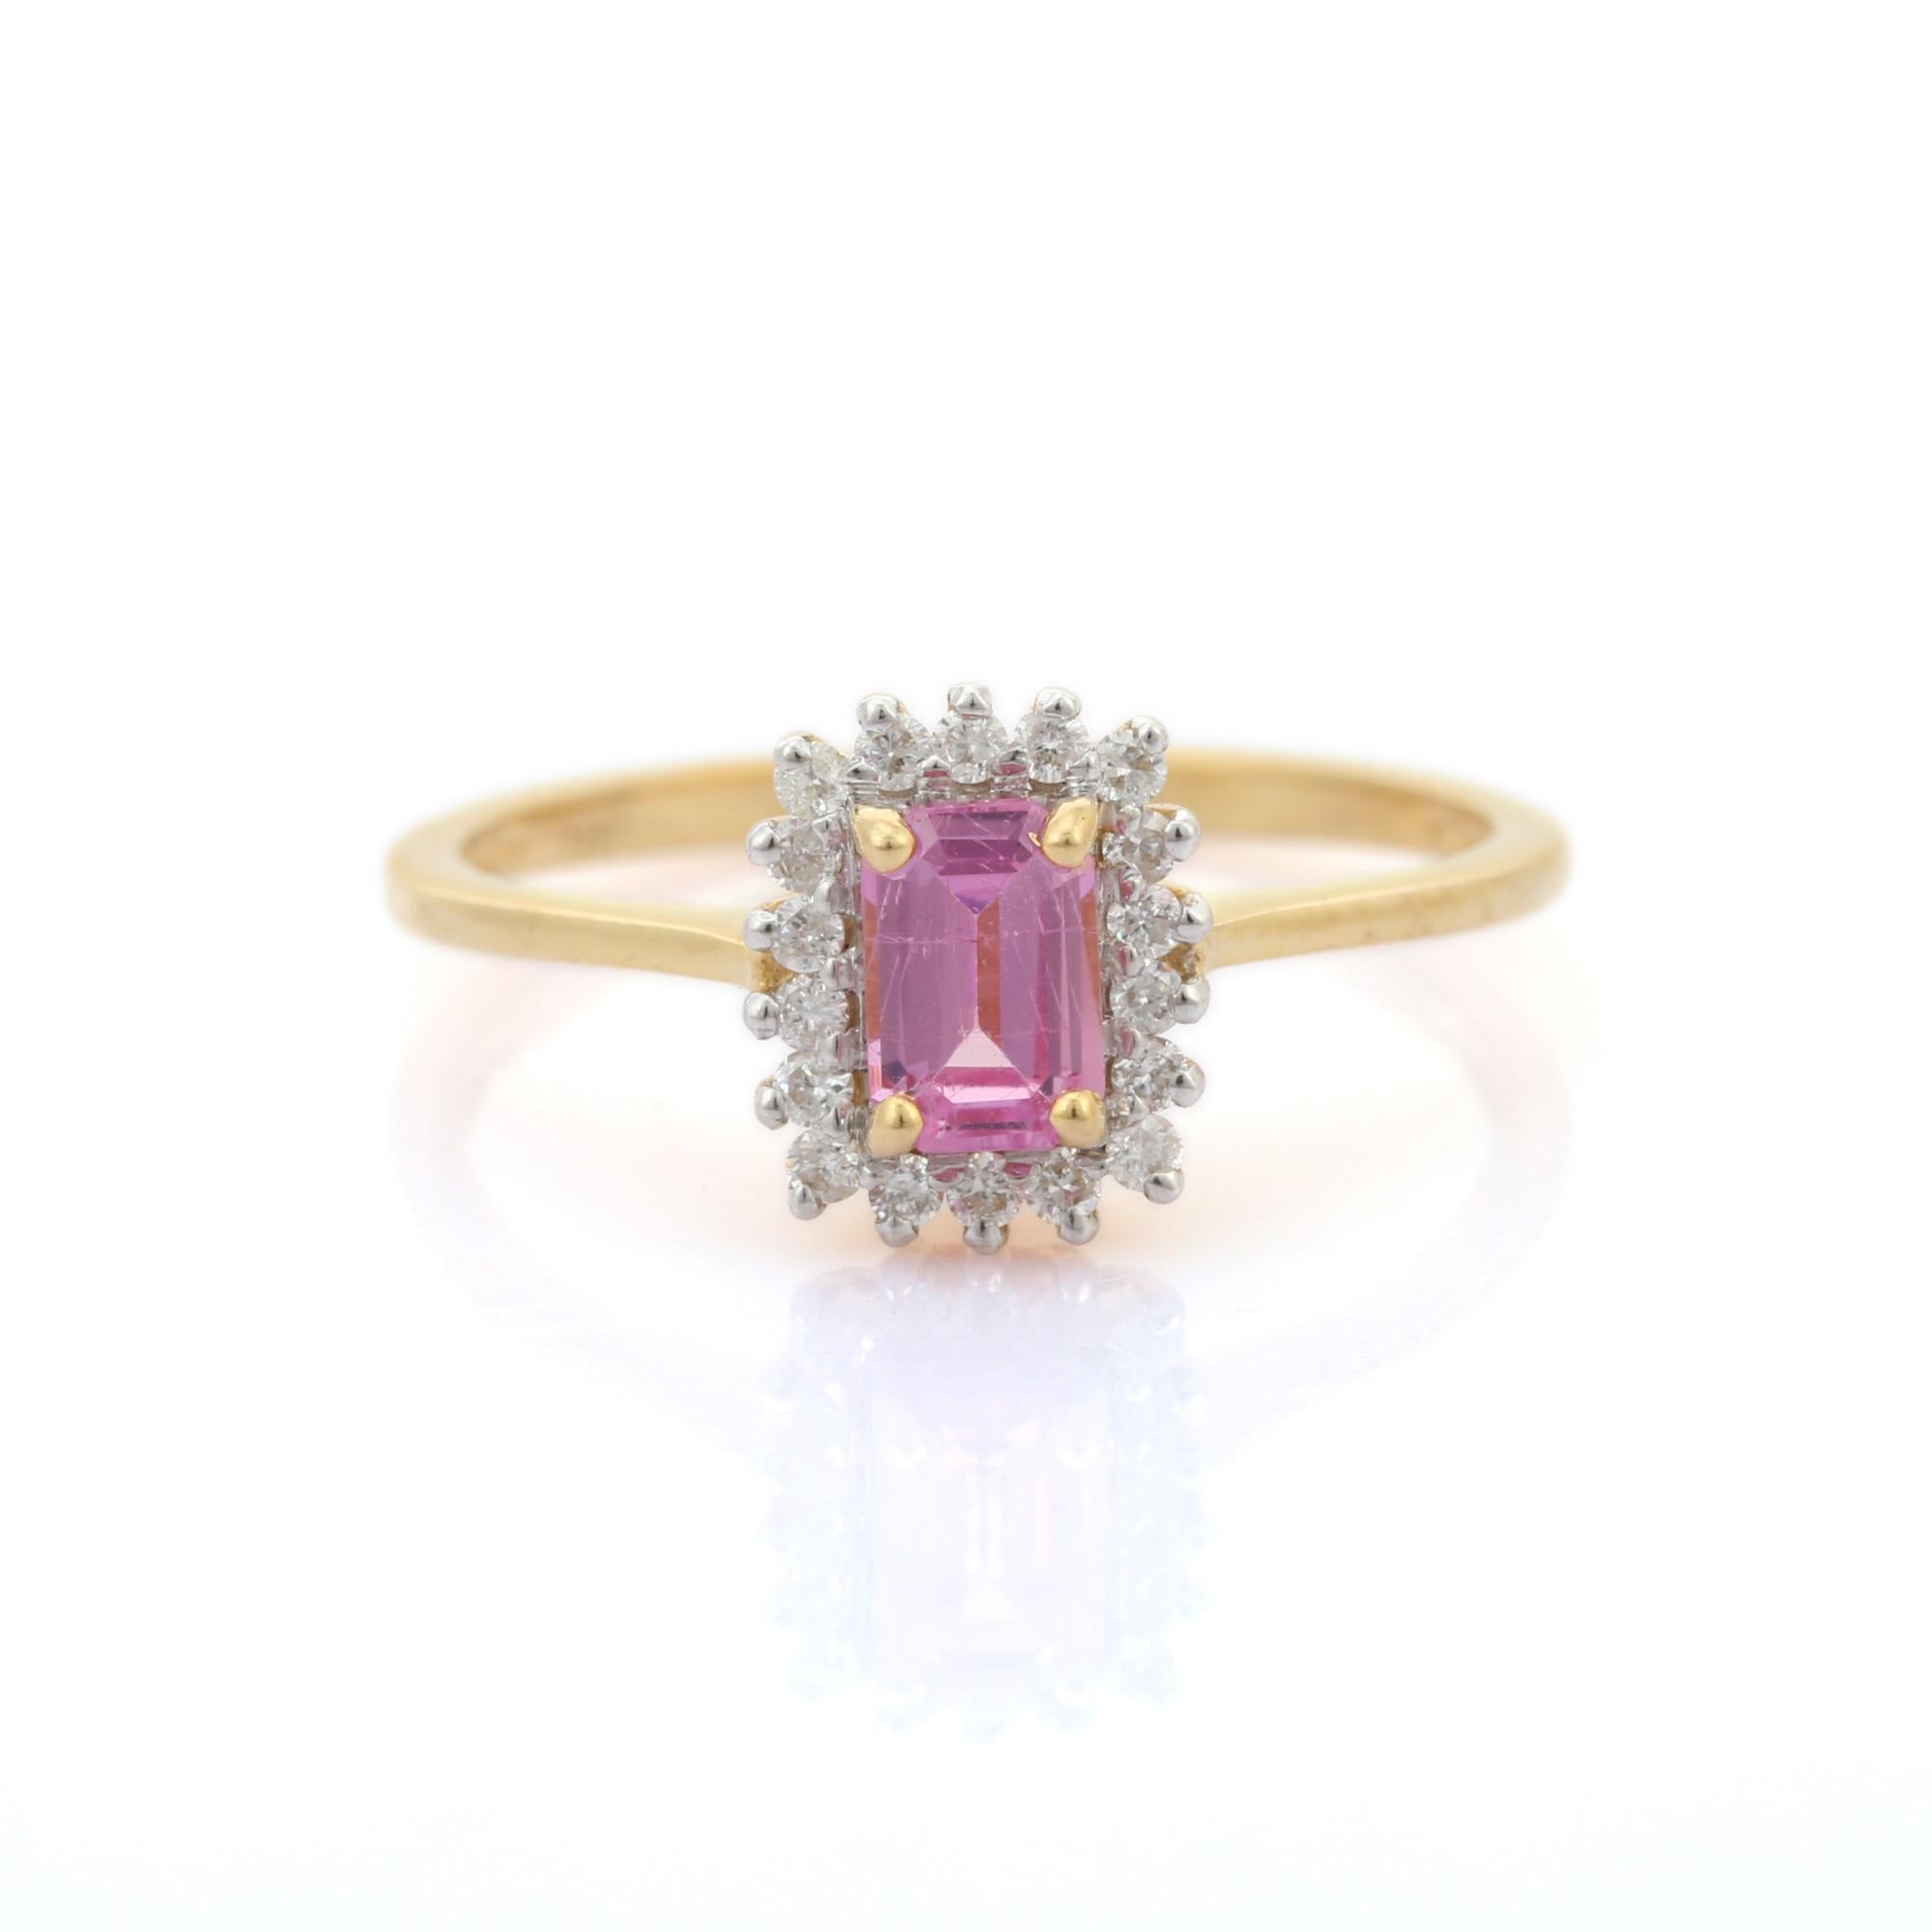 For Sale:  Minimalist Pink Sapphire Halo Diamond Bridal Ring in 14K Solid Yellow Gold 2